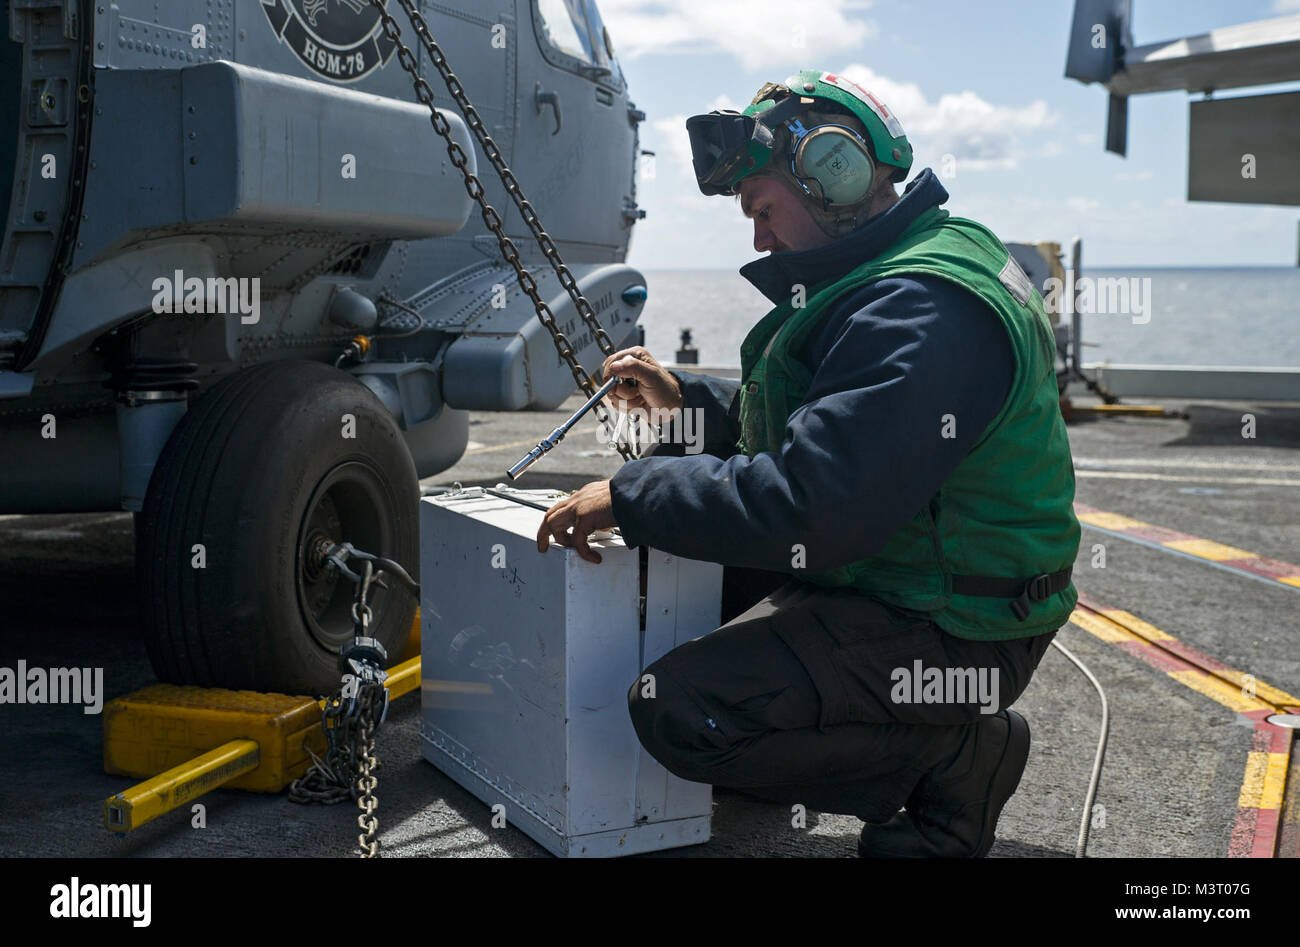 151030-N-EH855-003 PACIFIC OCEAN (Oct. 30, 2015) Aviation Machinist's Mate 2nd Class Max Hofstetter removes tools from a toolbox on the flight deck of aircraft carrier USS George Washington (CVN 73). Washington is deployed as a part of Southern Seas 2015. The eighth deployment of its kind, Southern Seas 2015 seeks to enhance interoperability, increase regional stability, and build and maintain regional relationships with countries throughout the region through joint multinational and interagency exchanges and cooperation. (U.S. Navy photo by Mass Communication Specialist 3rd Class Bryan Mai/Re Stock Photo